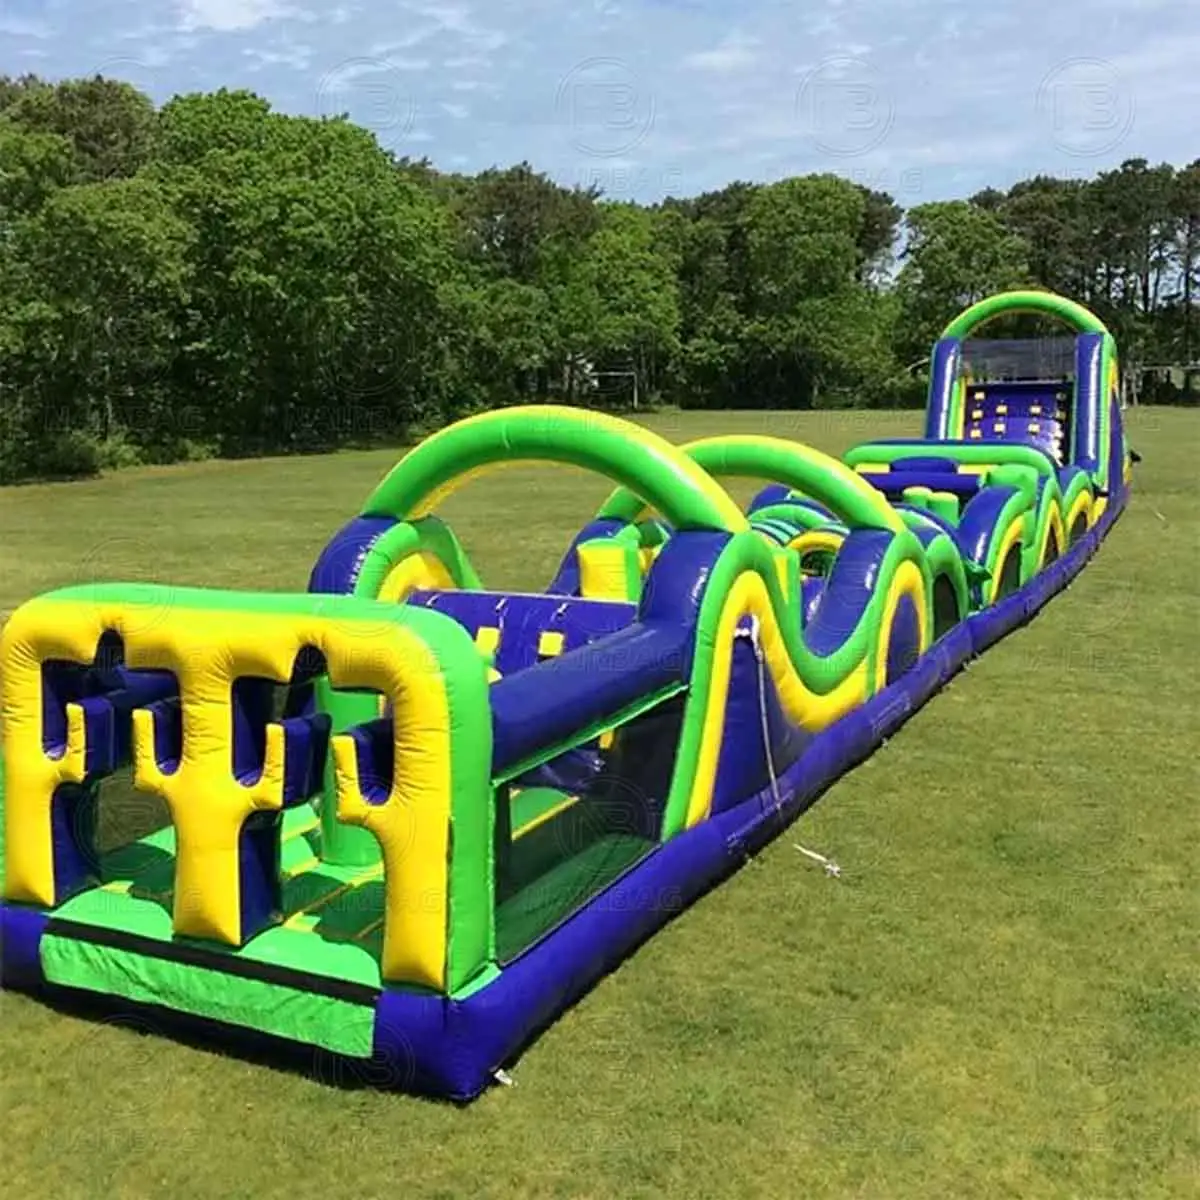 Giant Radical Run Inflatable Obstacle Course 100ft Long Rock Wall and Slide Great for Corporate Events